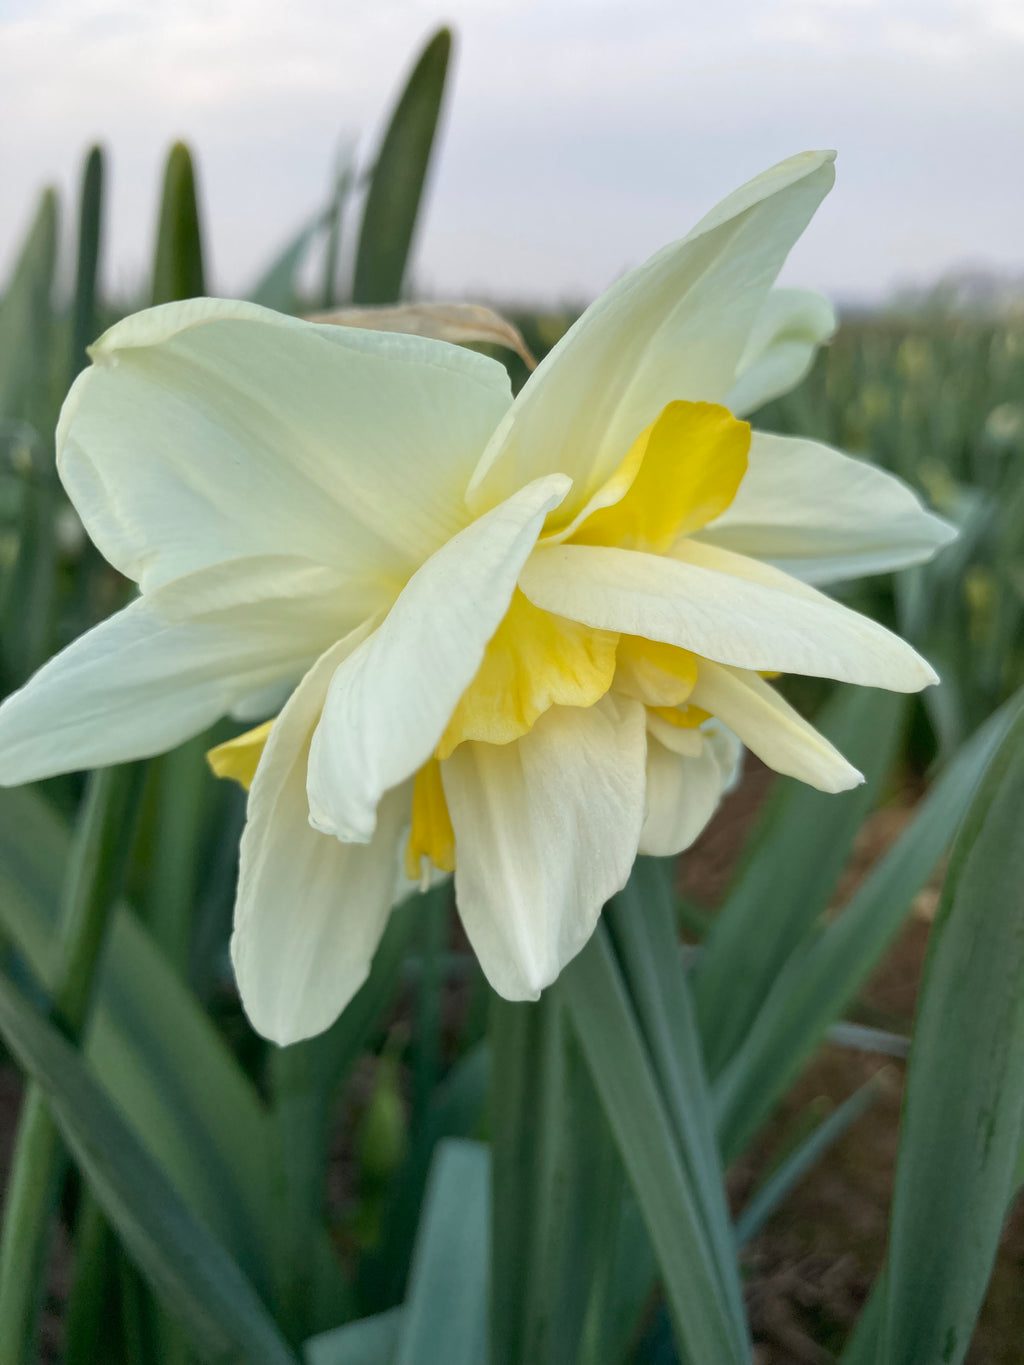 Daffodil 'White Lion' Bulbs (Narcissus) Free UK Postage